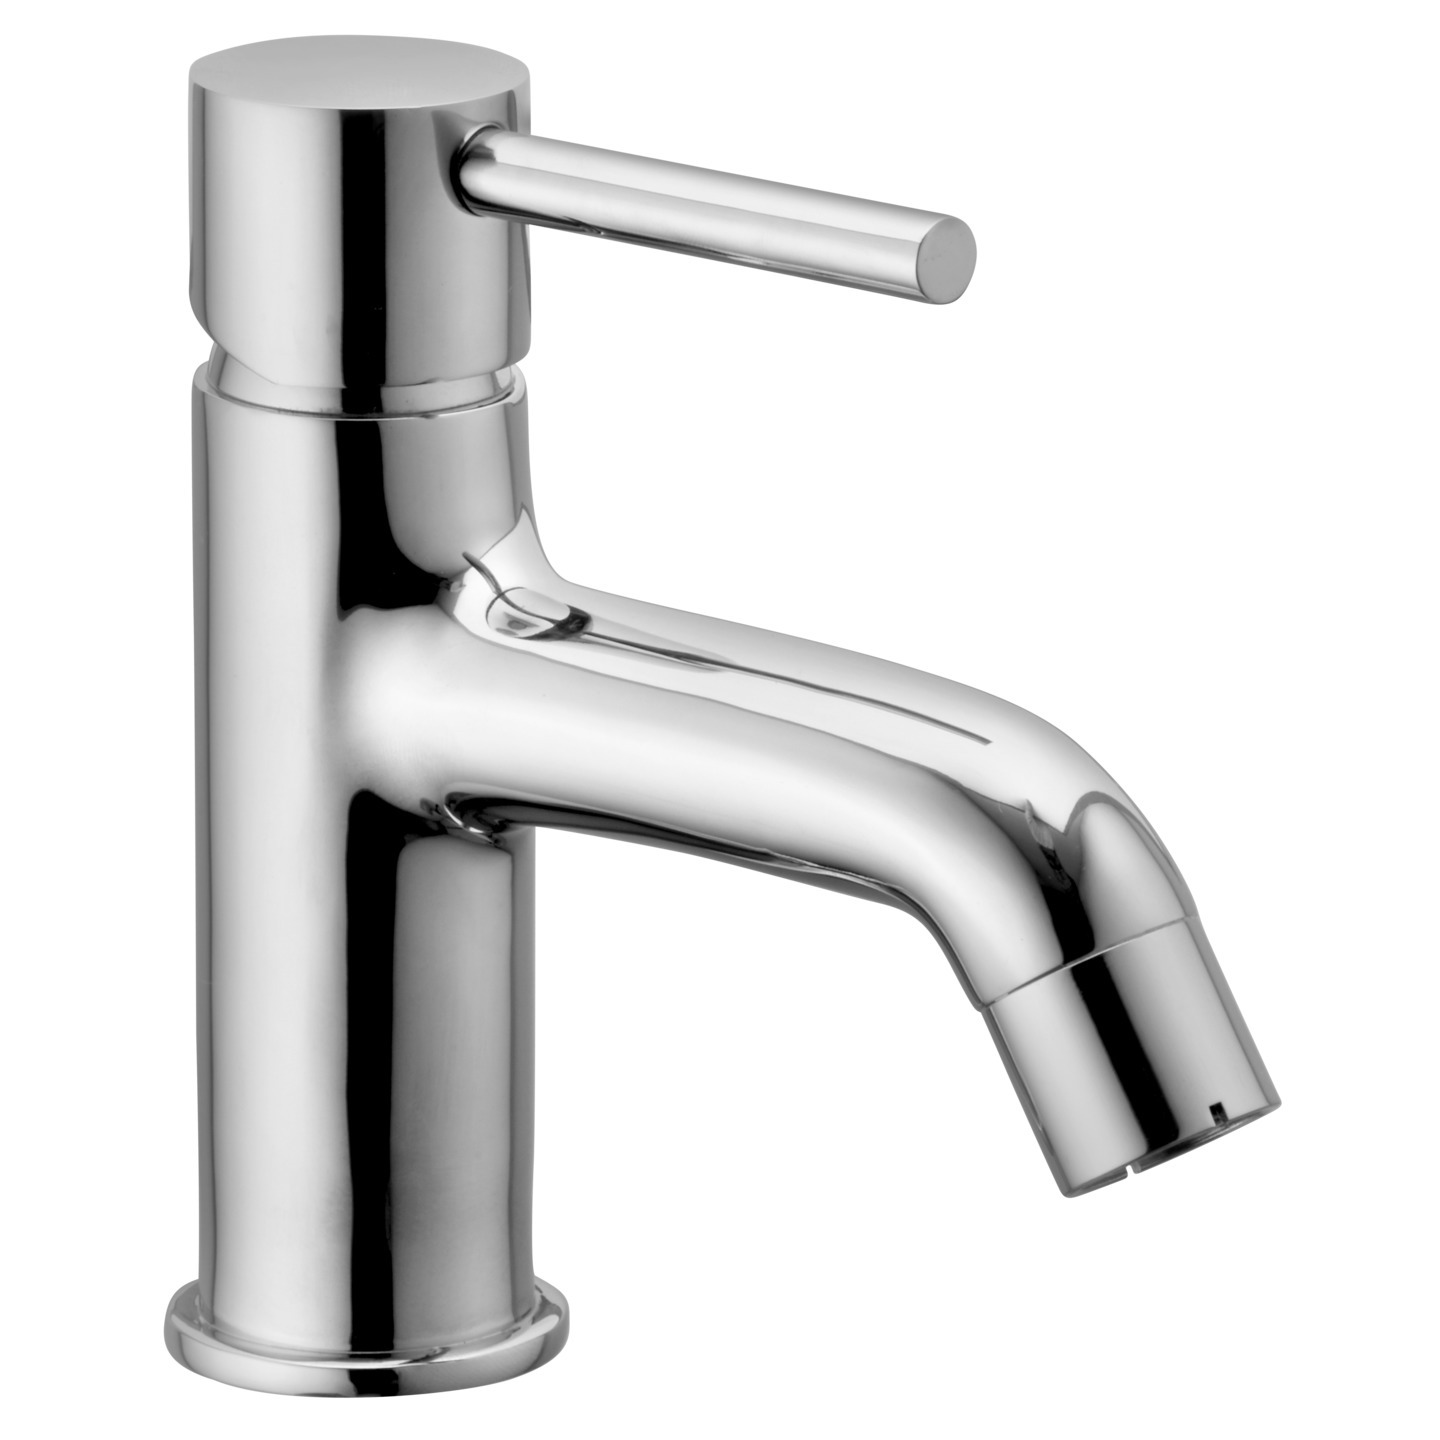 FLOSS SINGLE LEVER BASIN MIXER FROM AQUASTYLE